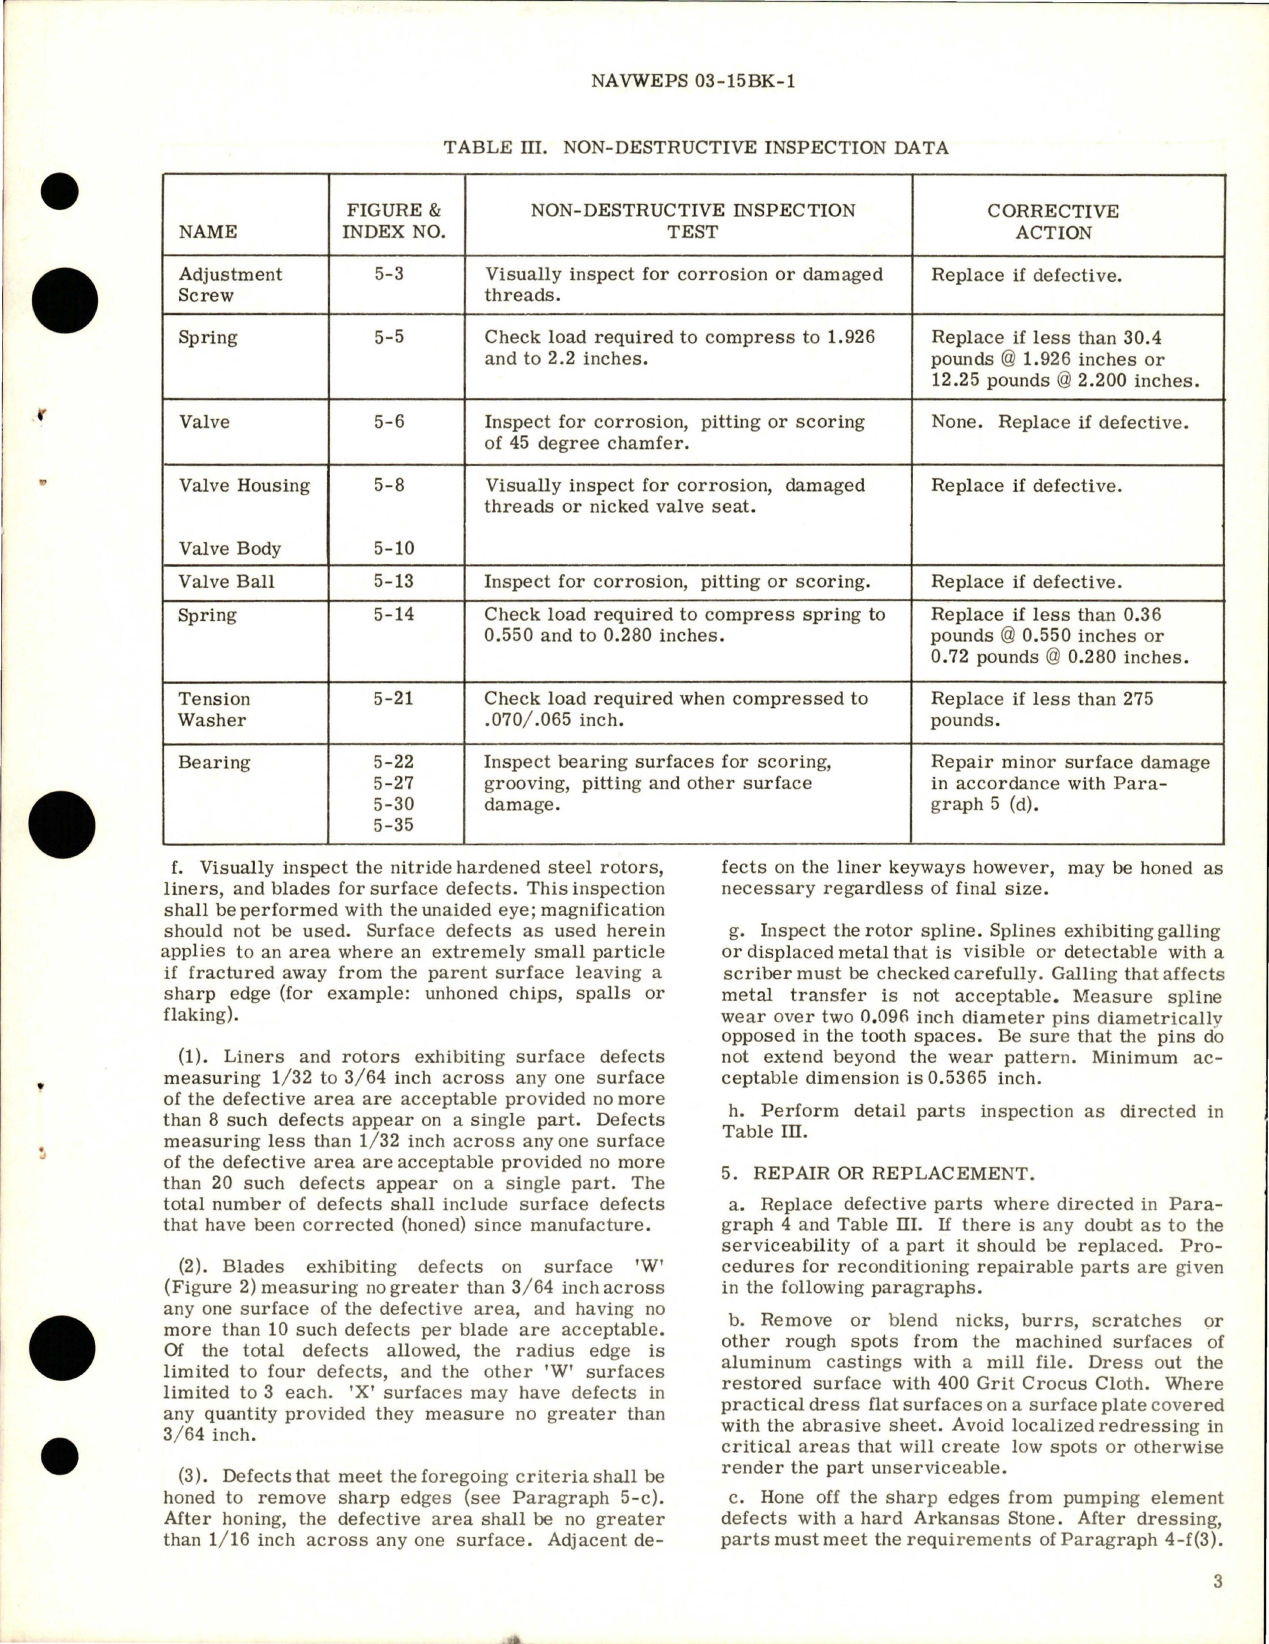 Sample page 5 from AirCorps Library document: Overhaul Instructions with Parts Breakdown for Power Driven Rotary Pump - Model RG17350